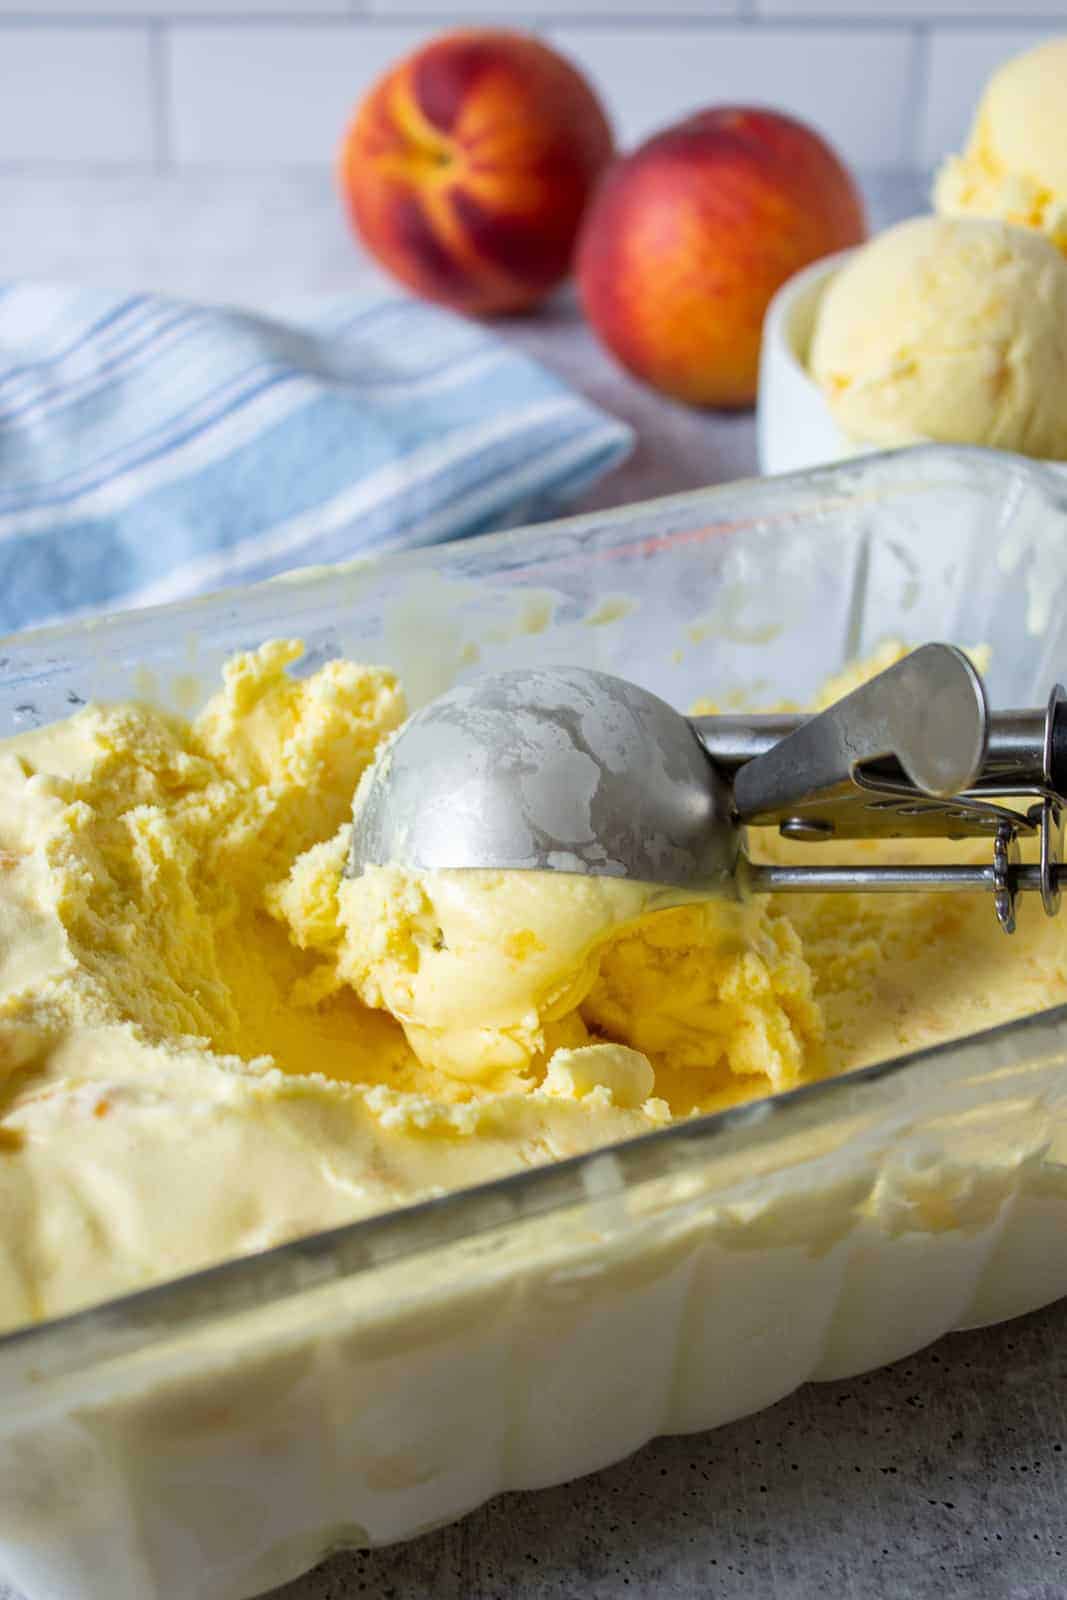 Peach ice cream in a glass loaf pan.